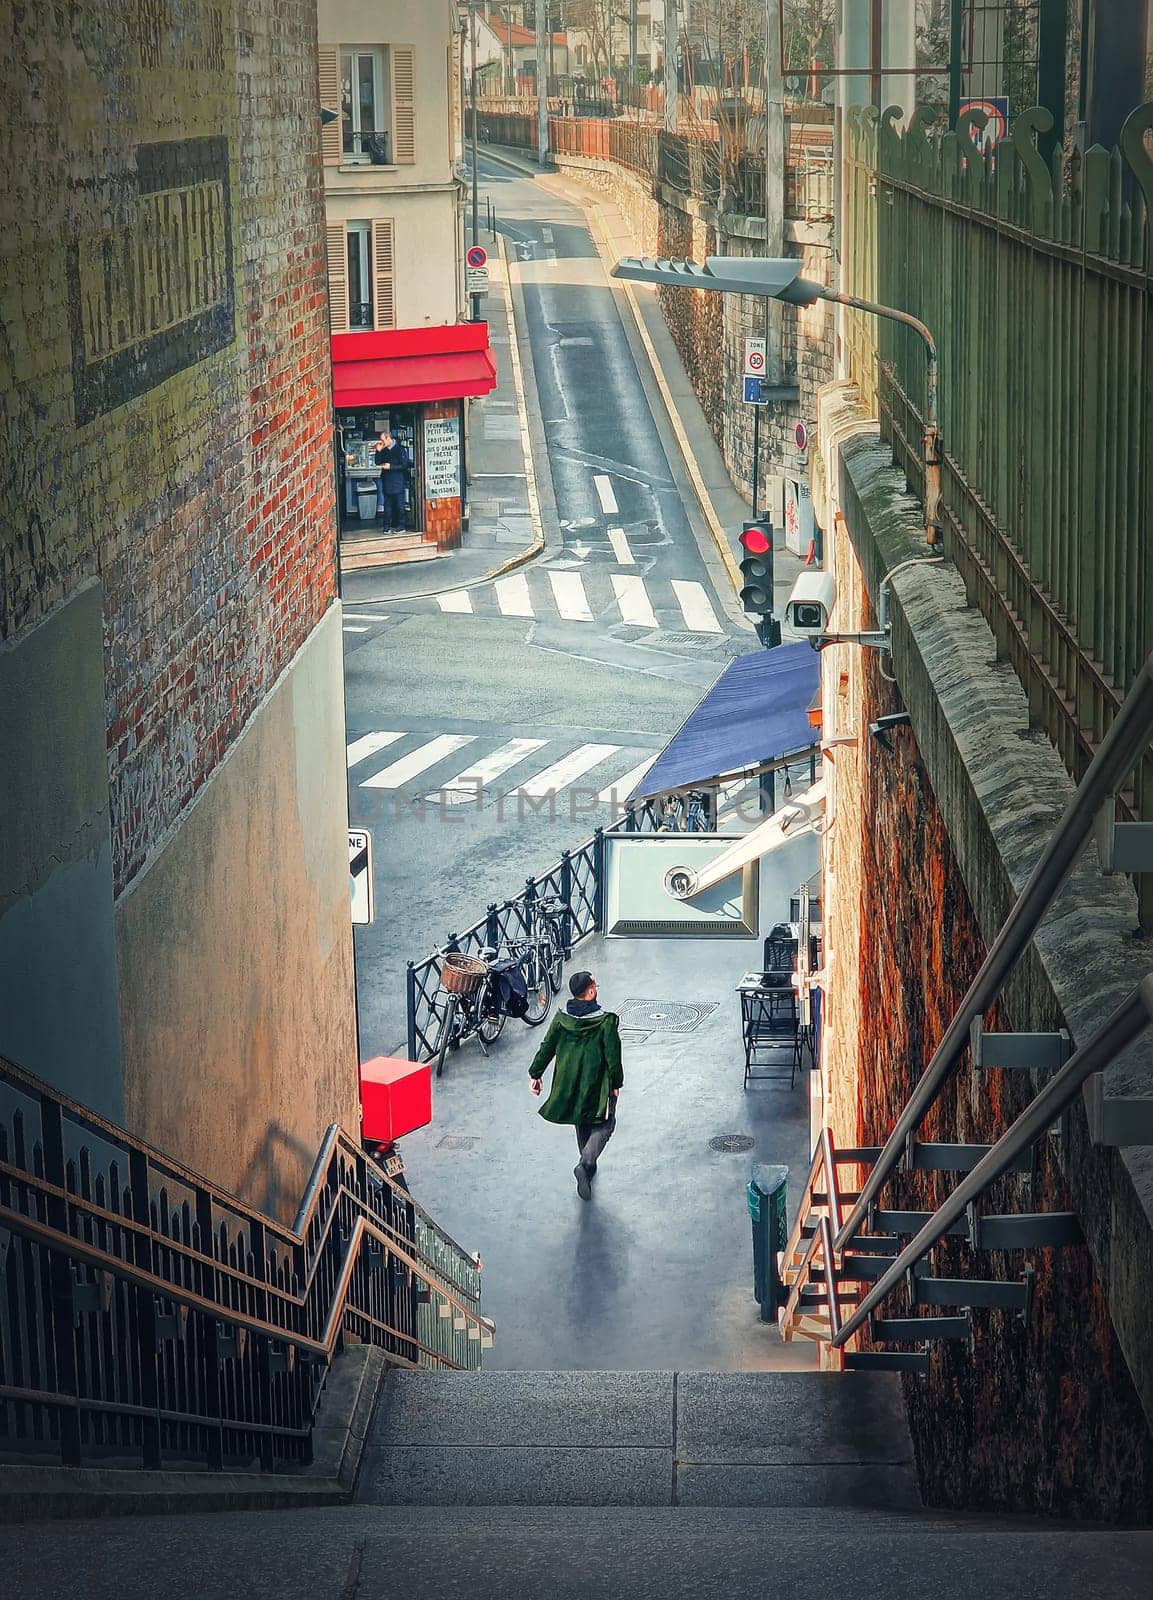 Outdoors scene with a man walking on the city streets in Asnieres sur Seine, a Paris suburb, France by psychoshadow